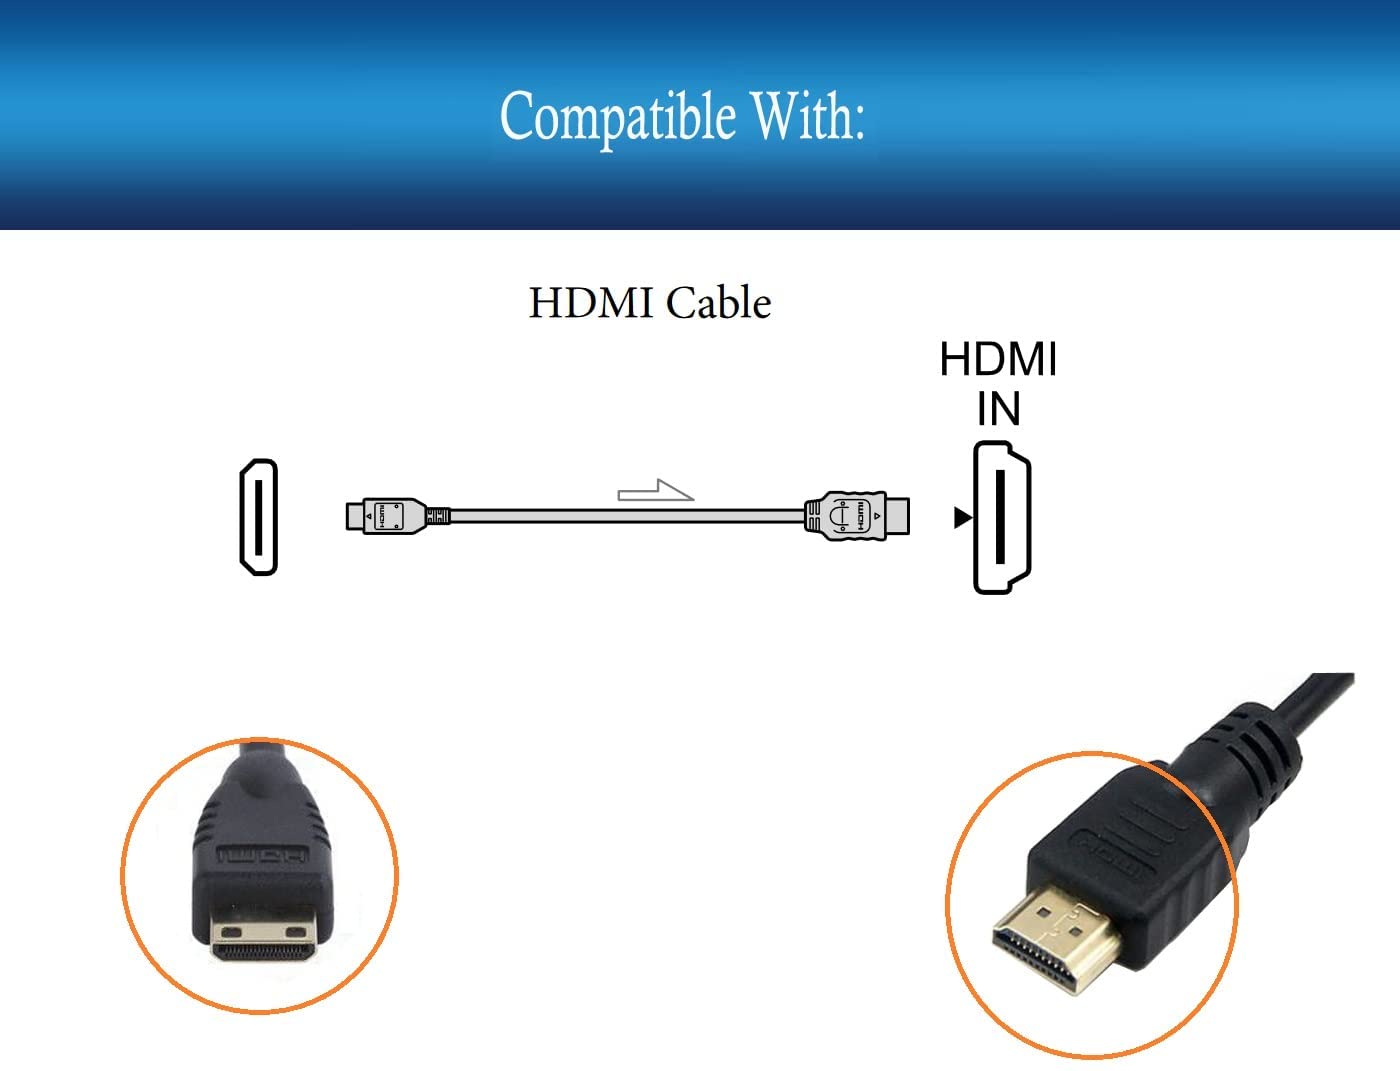 UPBRIGHT New Mini HDMI Cable Audio Video AV to HD TV HDTV Cord For Aluratek AT107F 7" WIFI Android Tablet PC - image 3 of 5